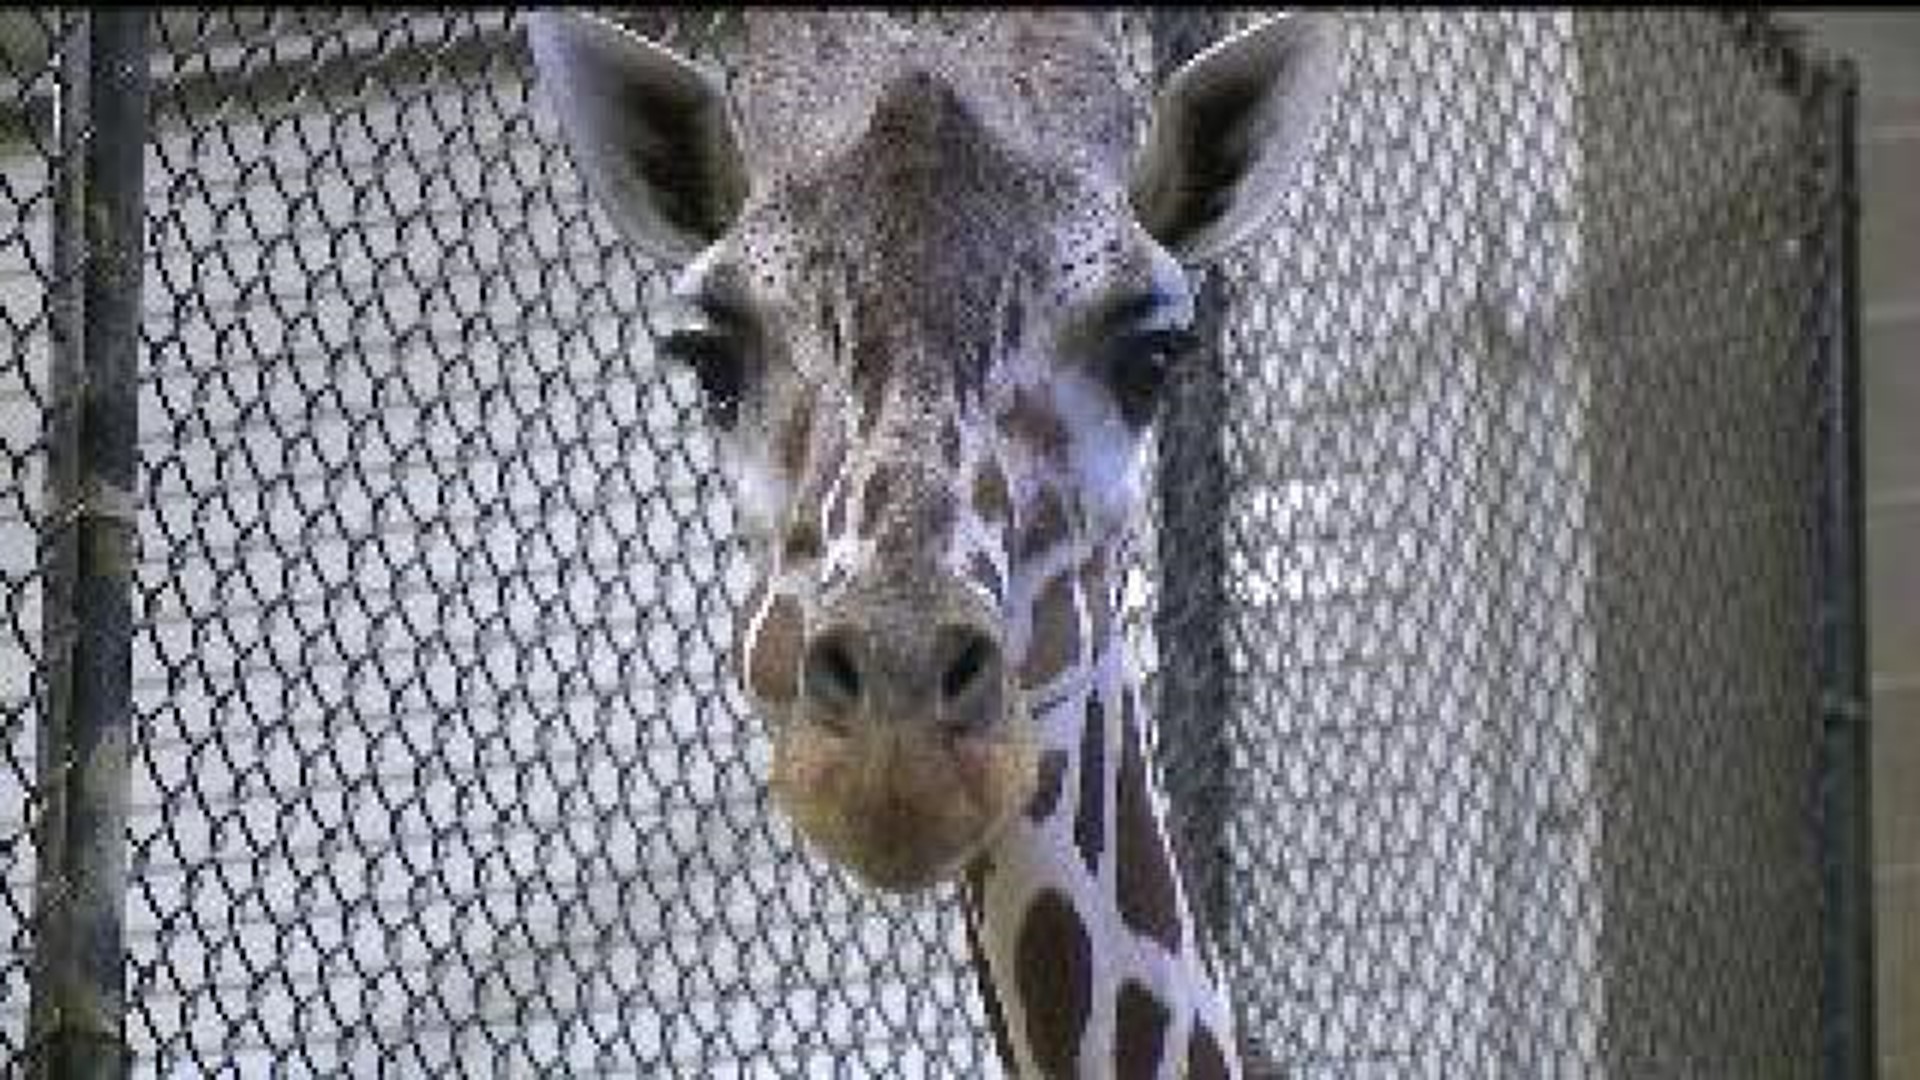 Pathologists determine cause of death for baby giraffe